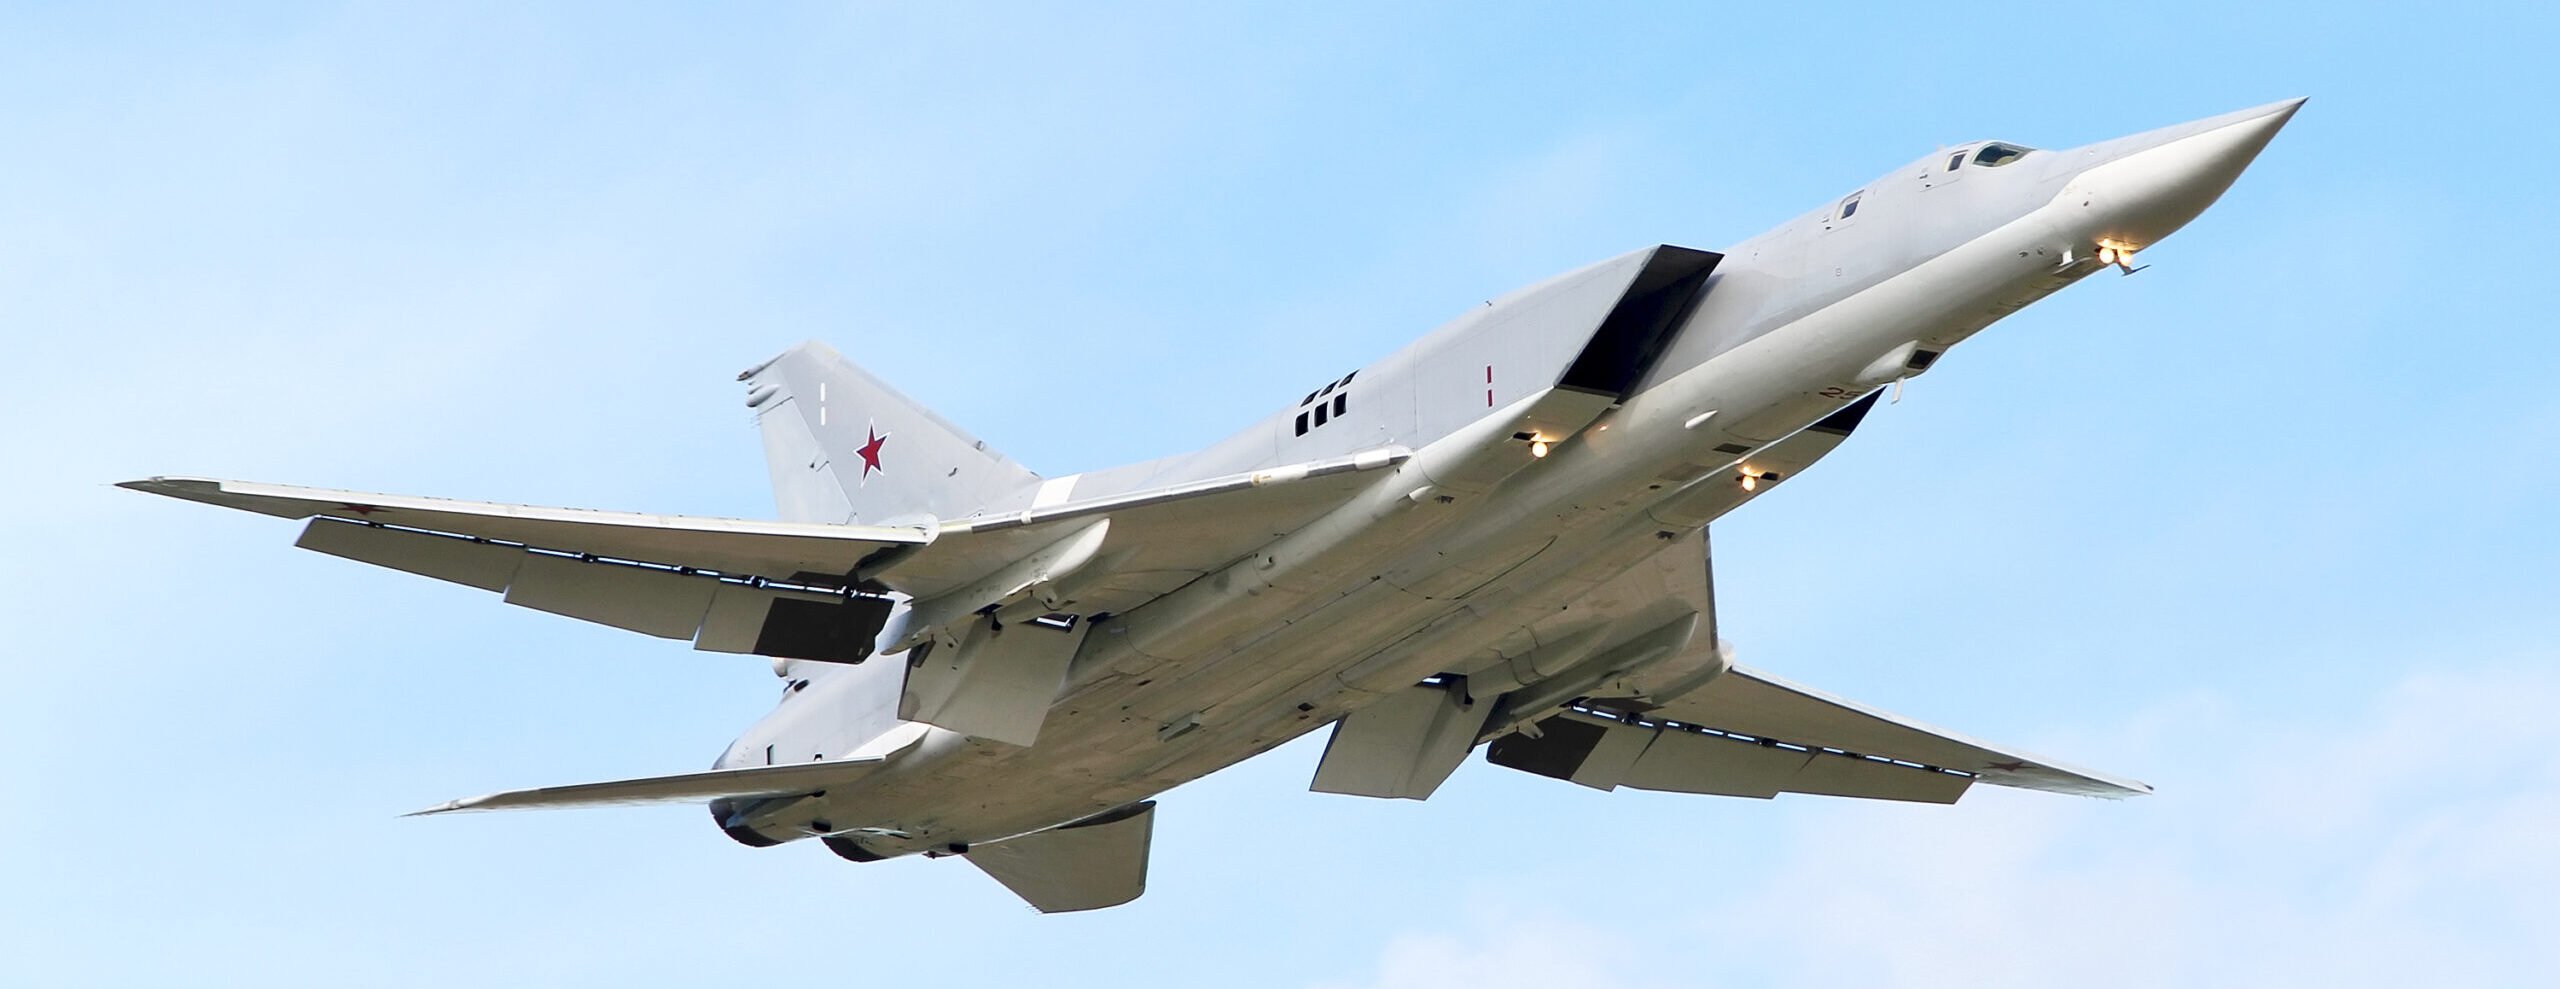 Ukraine downs Russian Tu-22M3 strategic bomber for the first time